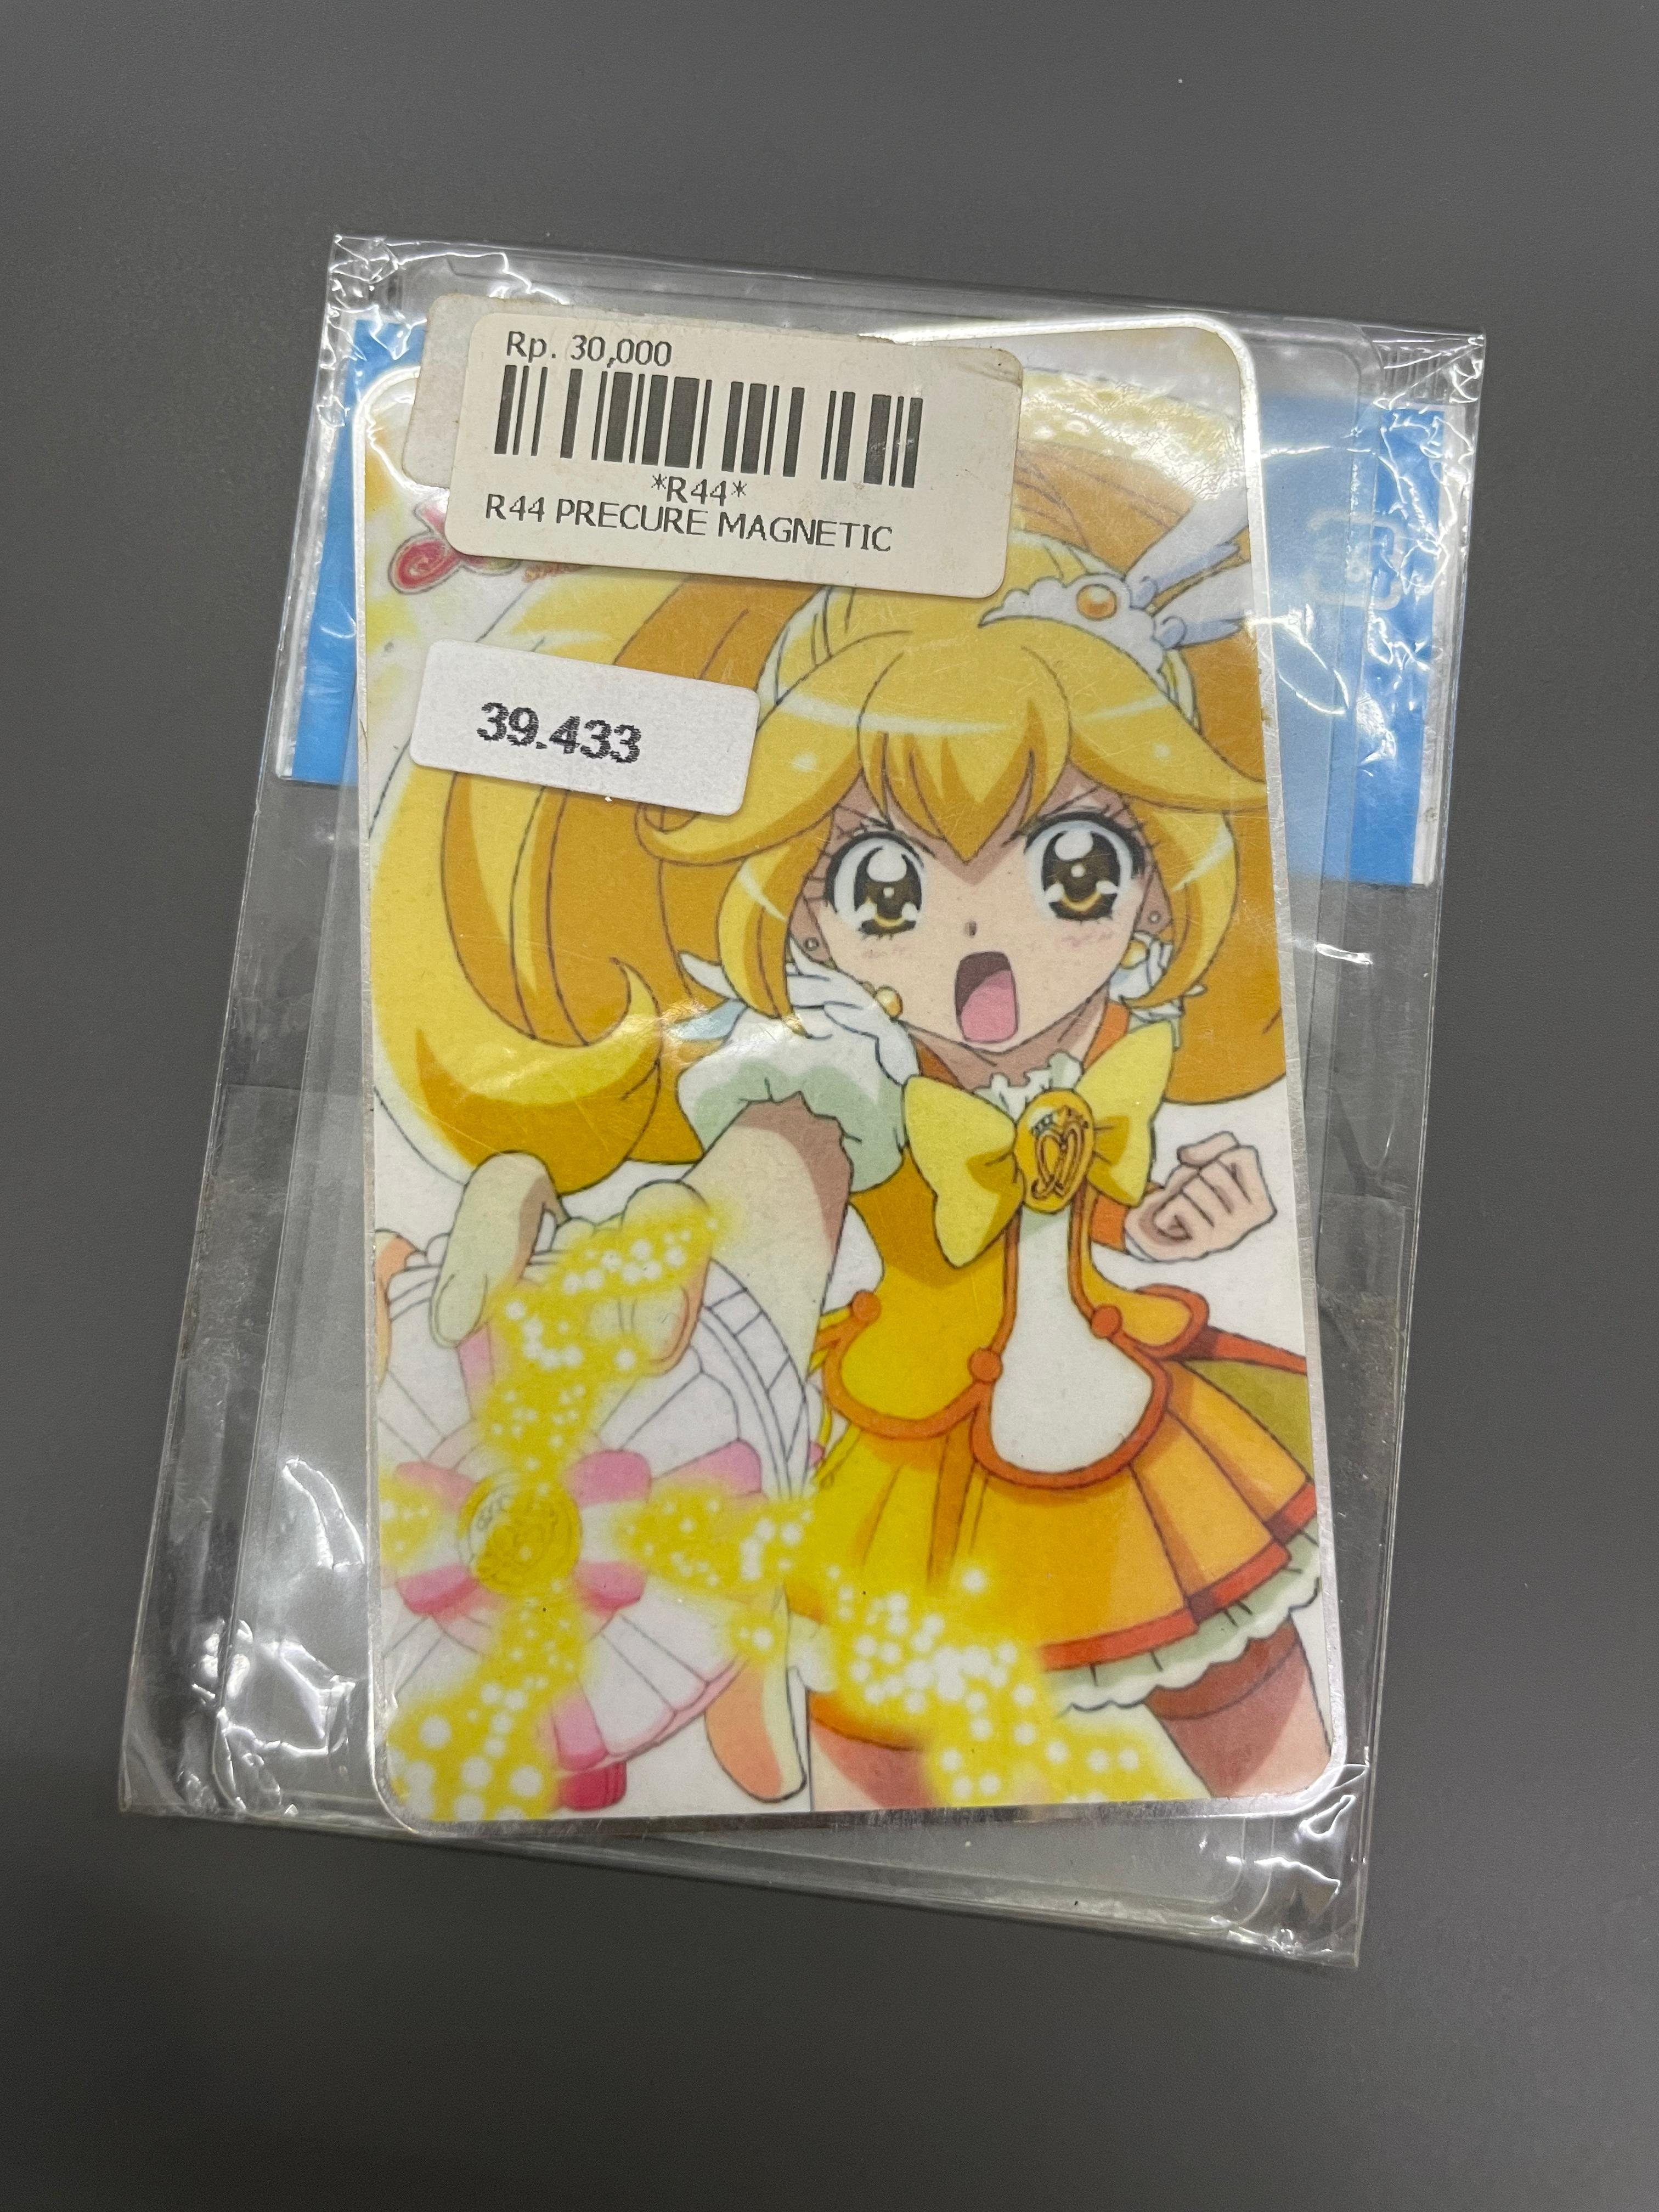 PRECURE MAGNETIC